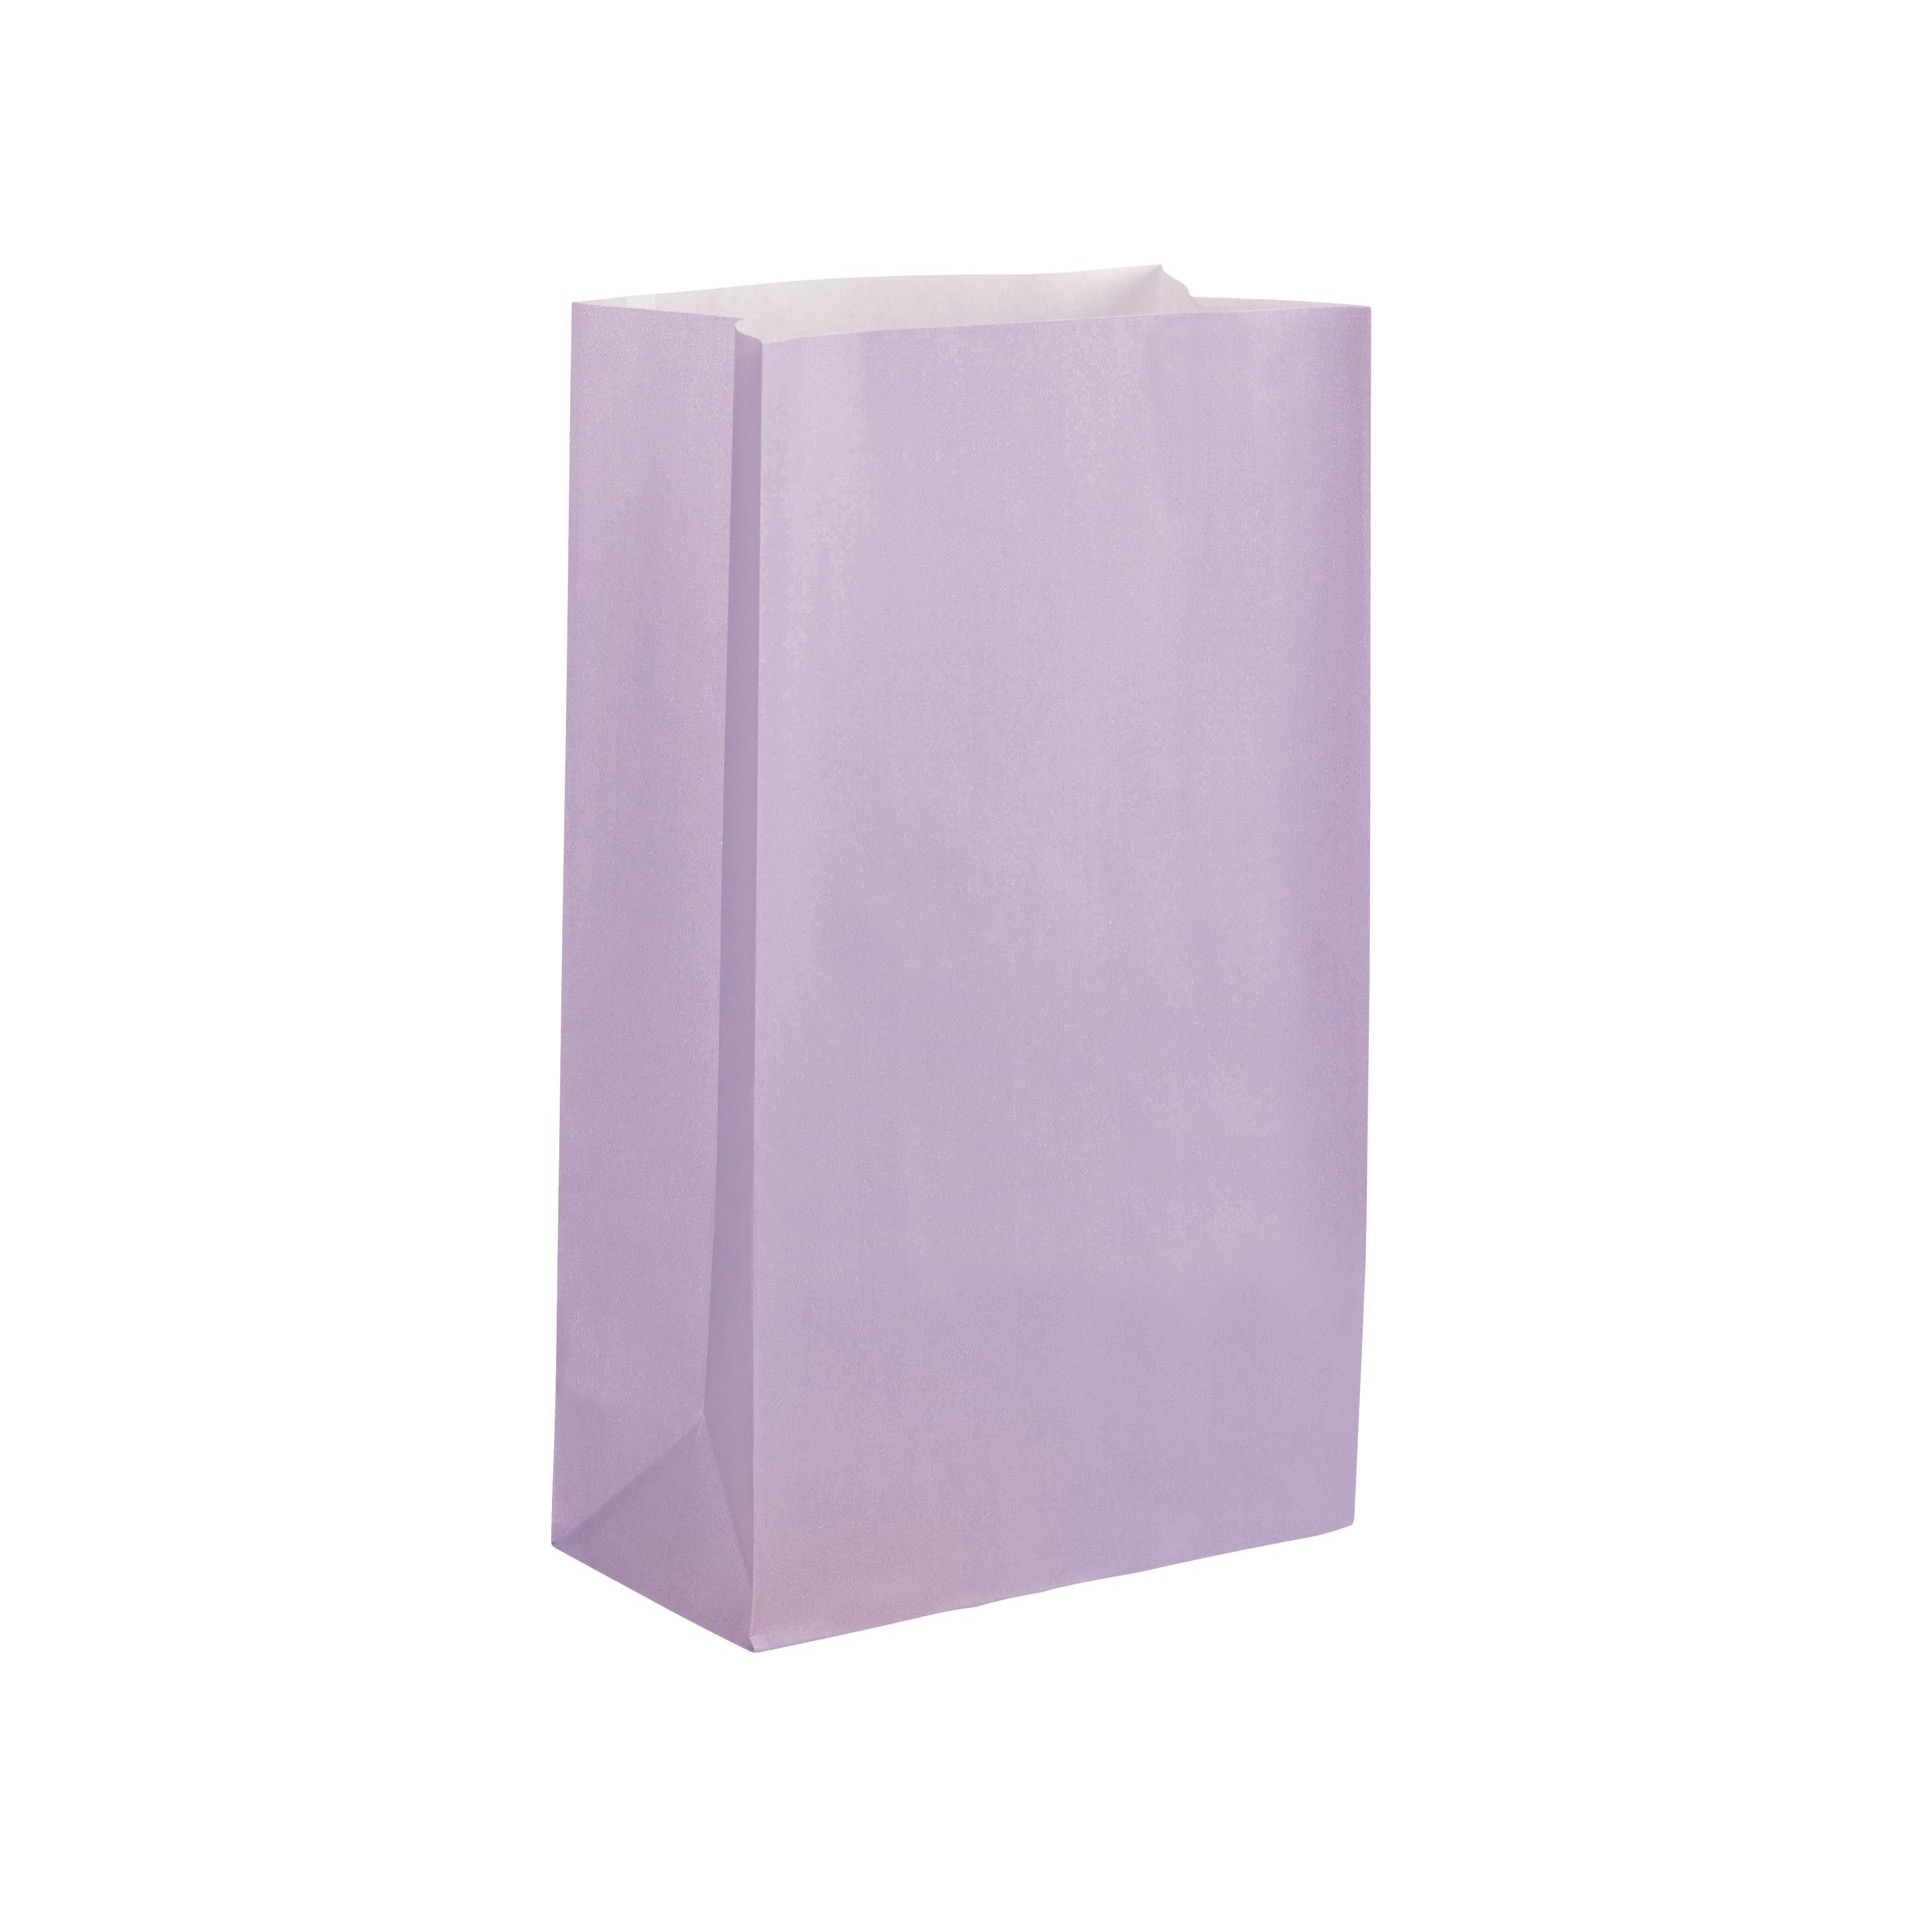 20 x 18 x 8 Lilac Party Paper Carrier Bags with Twisted Paper Handles Size 